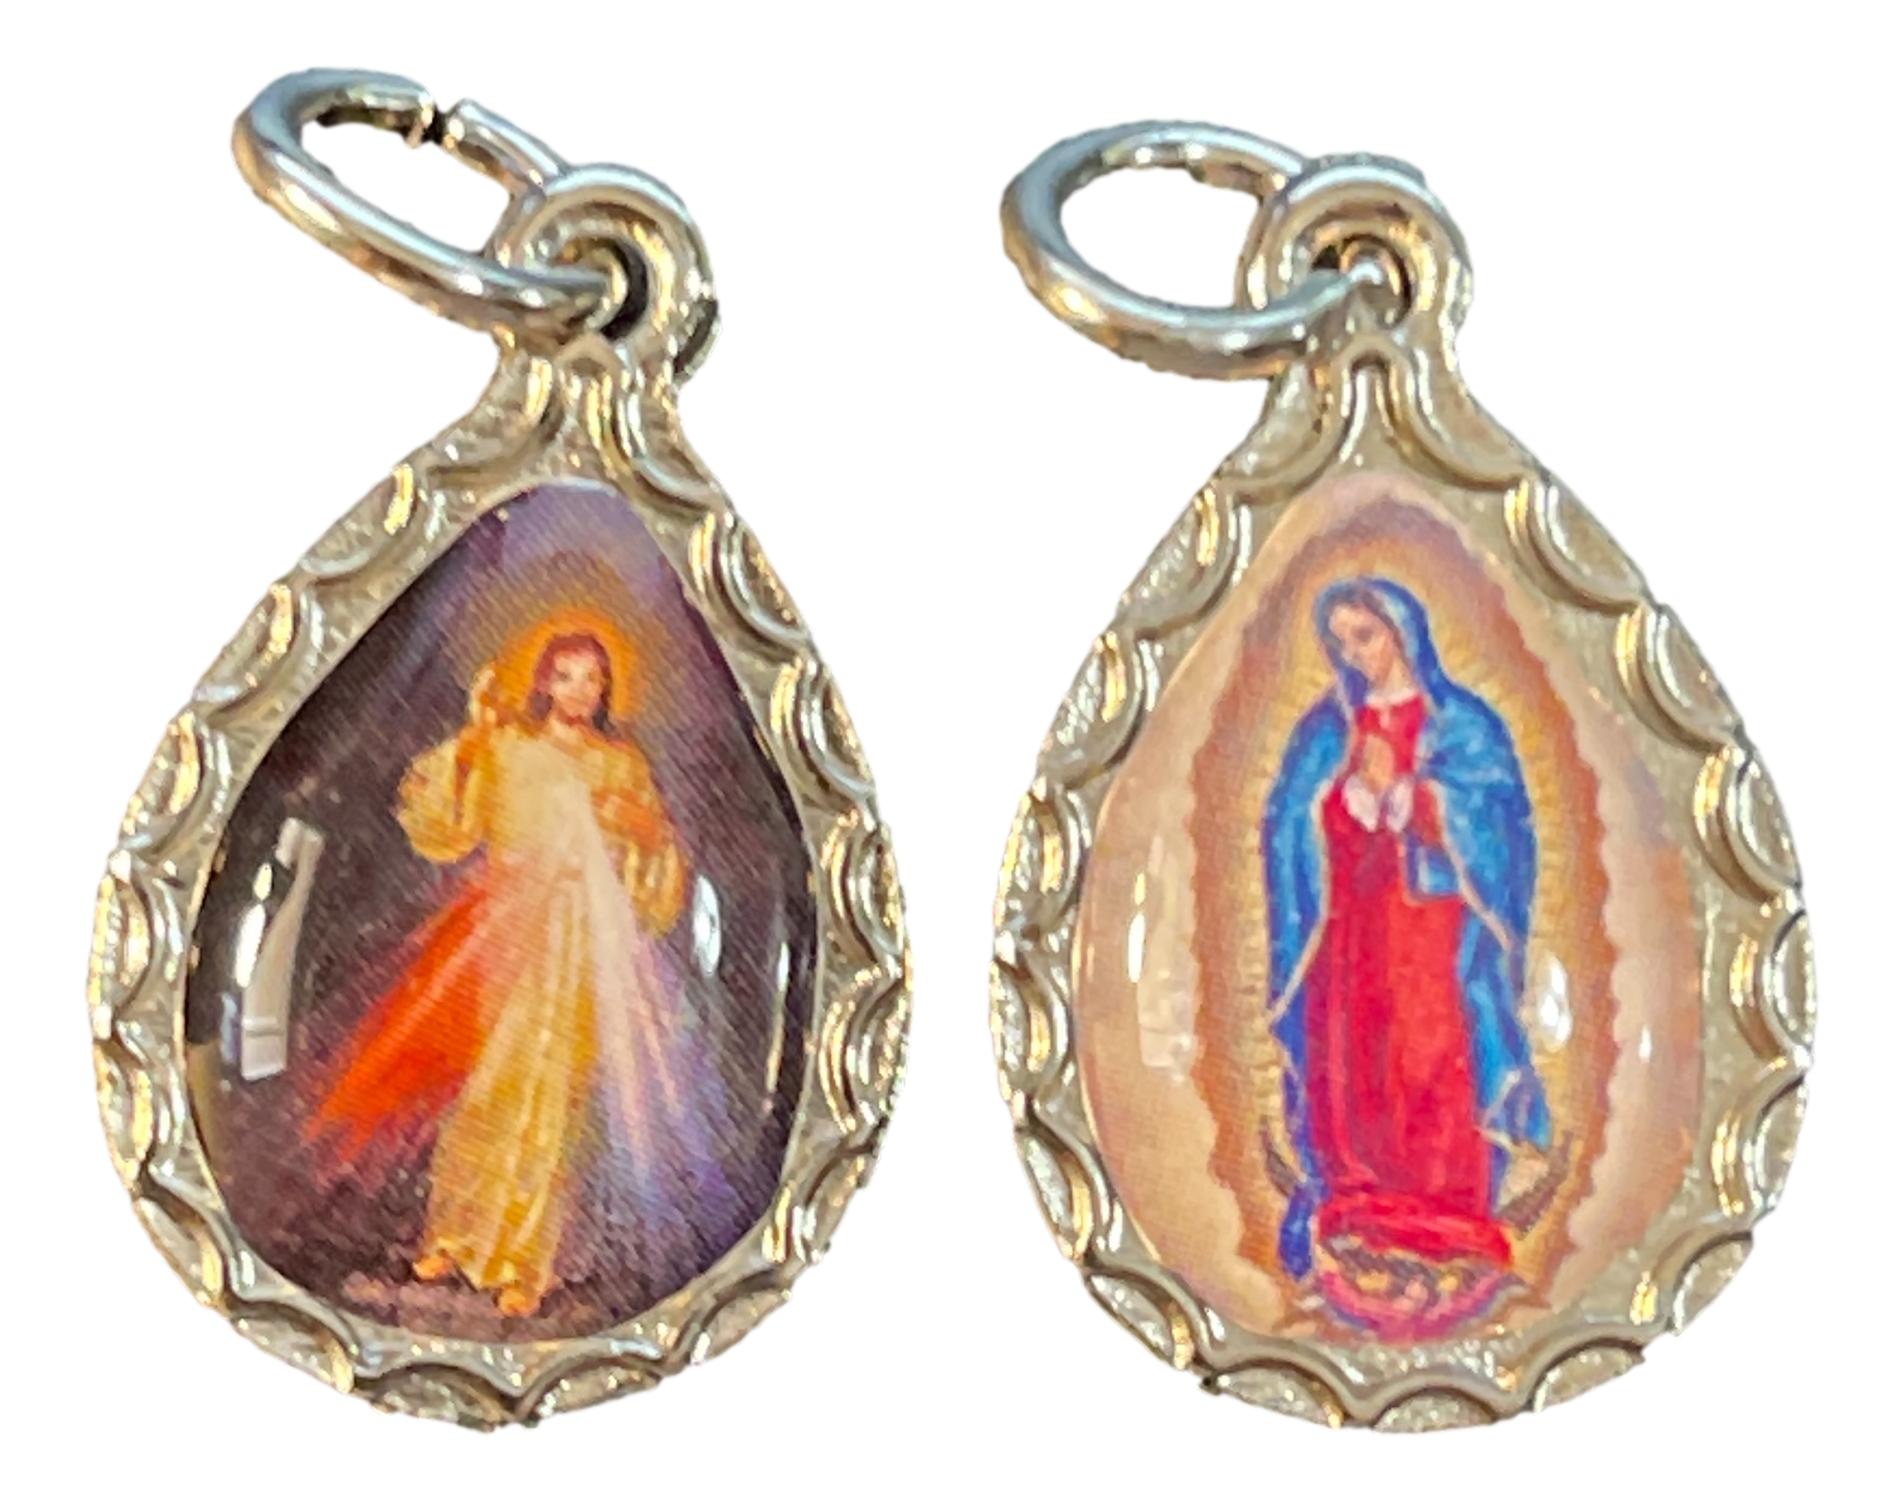 Medal Catholic Saint Charms Teardrop-Shaped Double-Sided Silvertone Edging Saint Encased in Clear Resin Jump Ring Made in Italy 2cm - Ysleta Mission Gift Shop- VOTED El Paso's Best Gift Shop